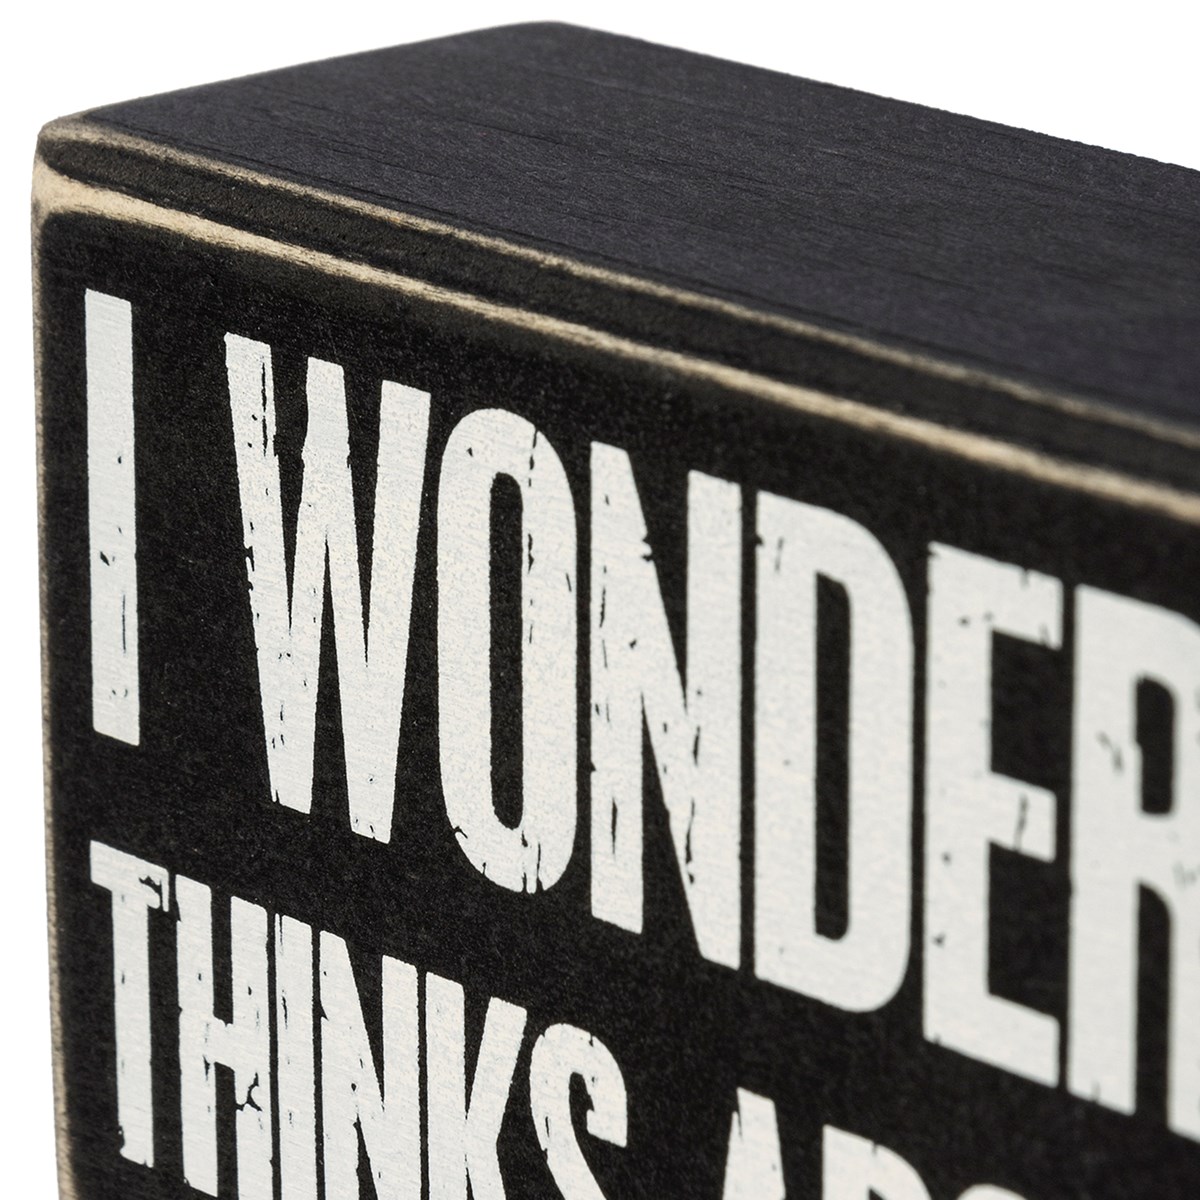 I Wonder If Beer Thinks About Me Box Sign - Wood